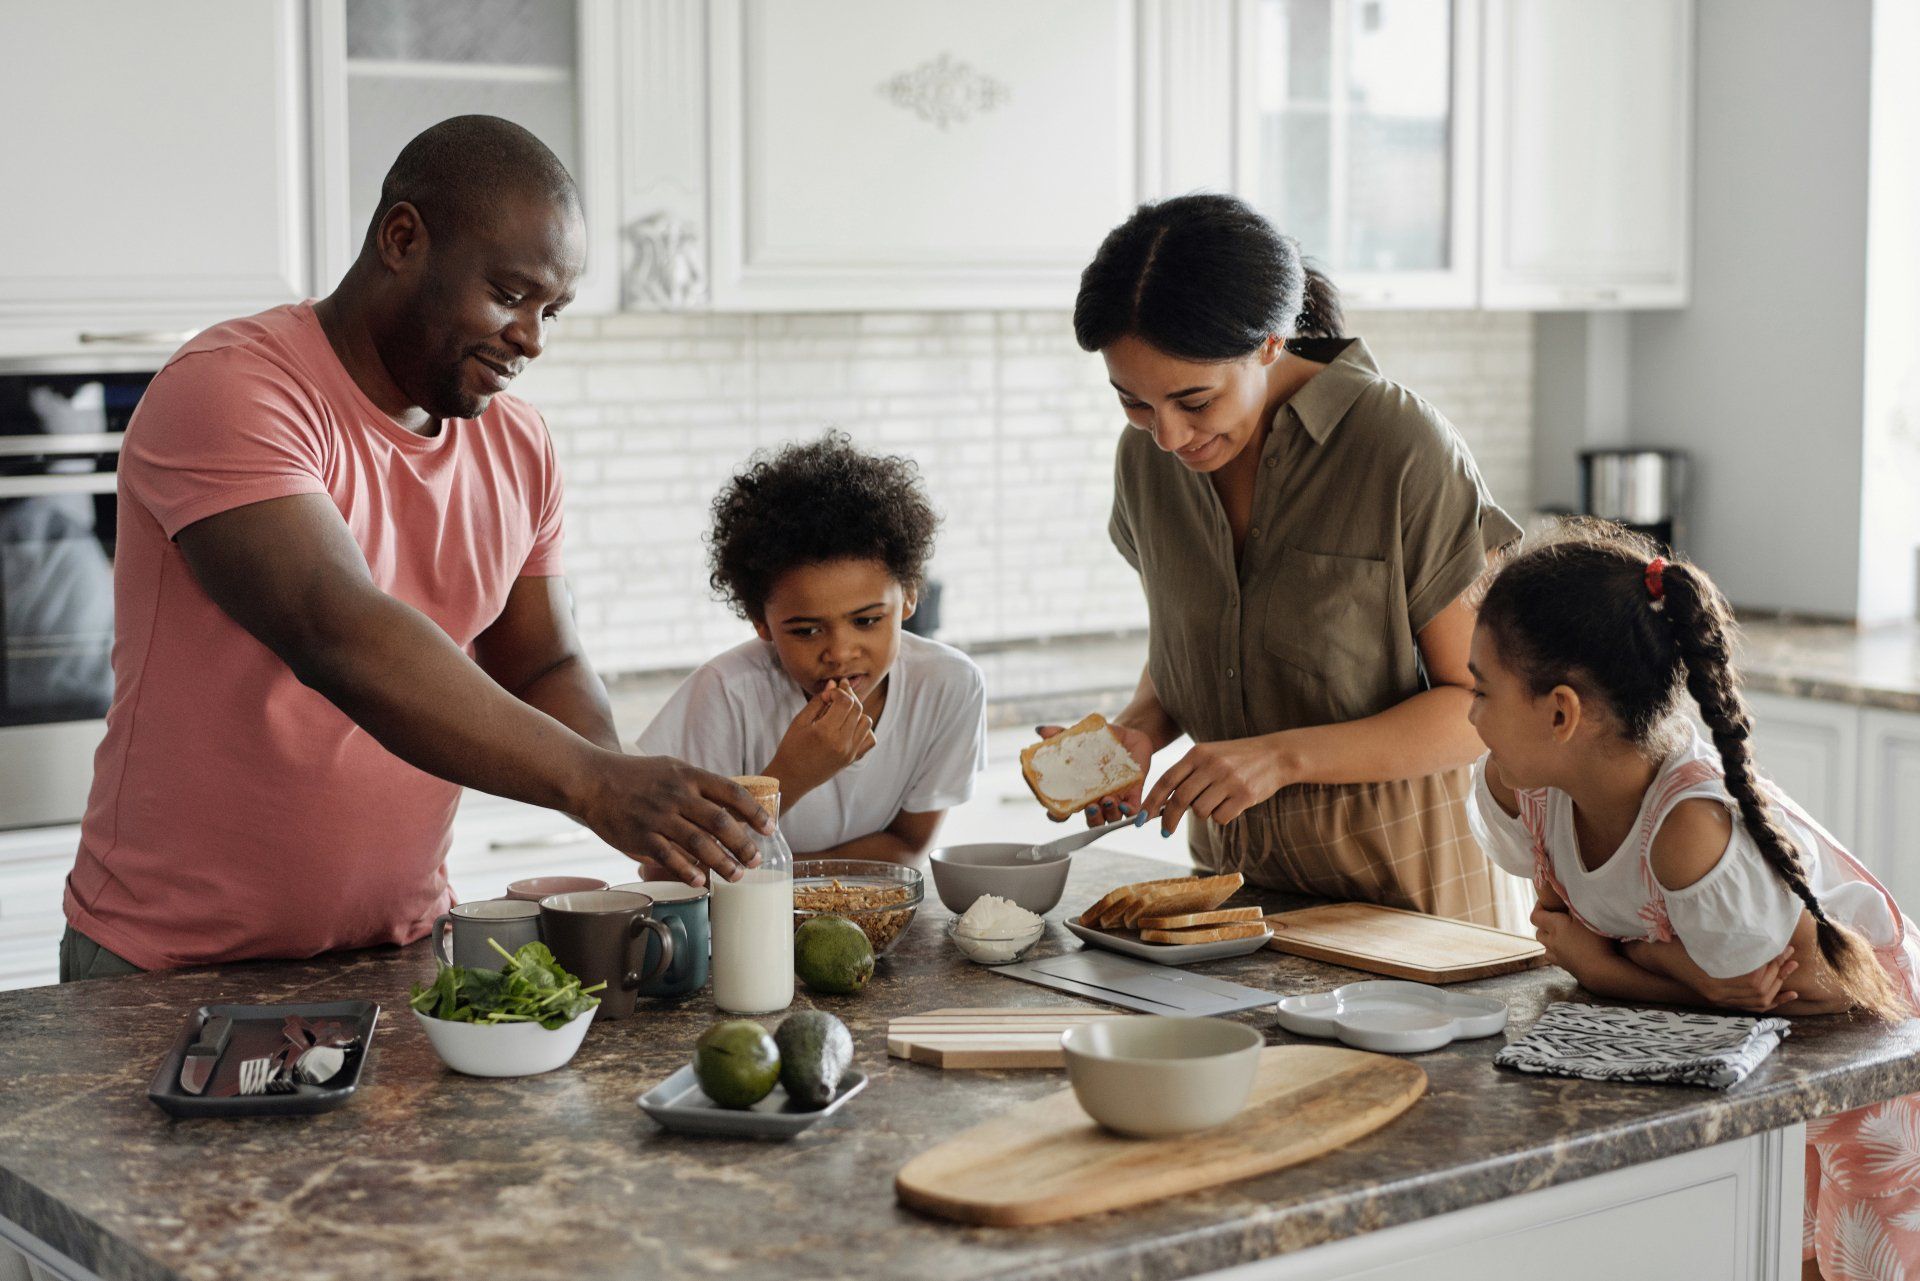 A family is preparing food together in a kitchen.